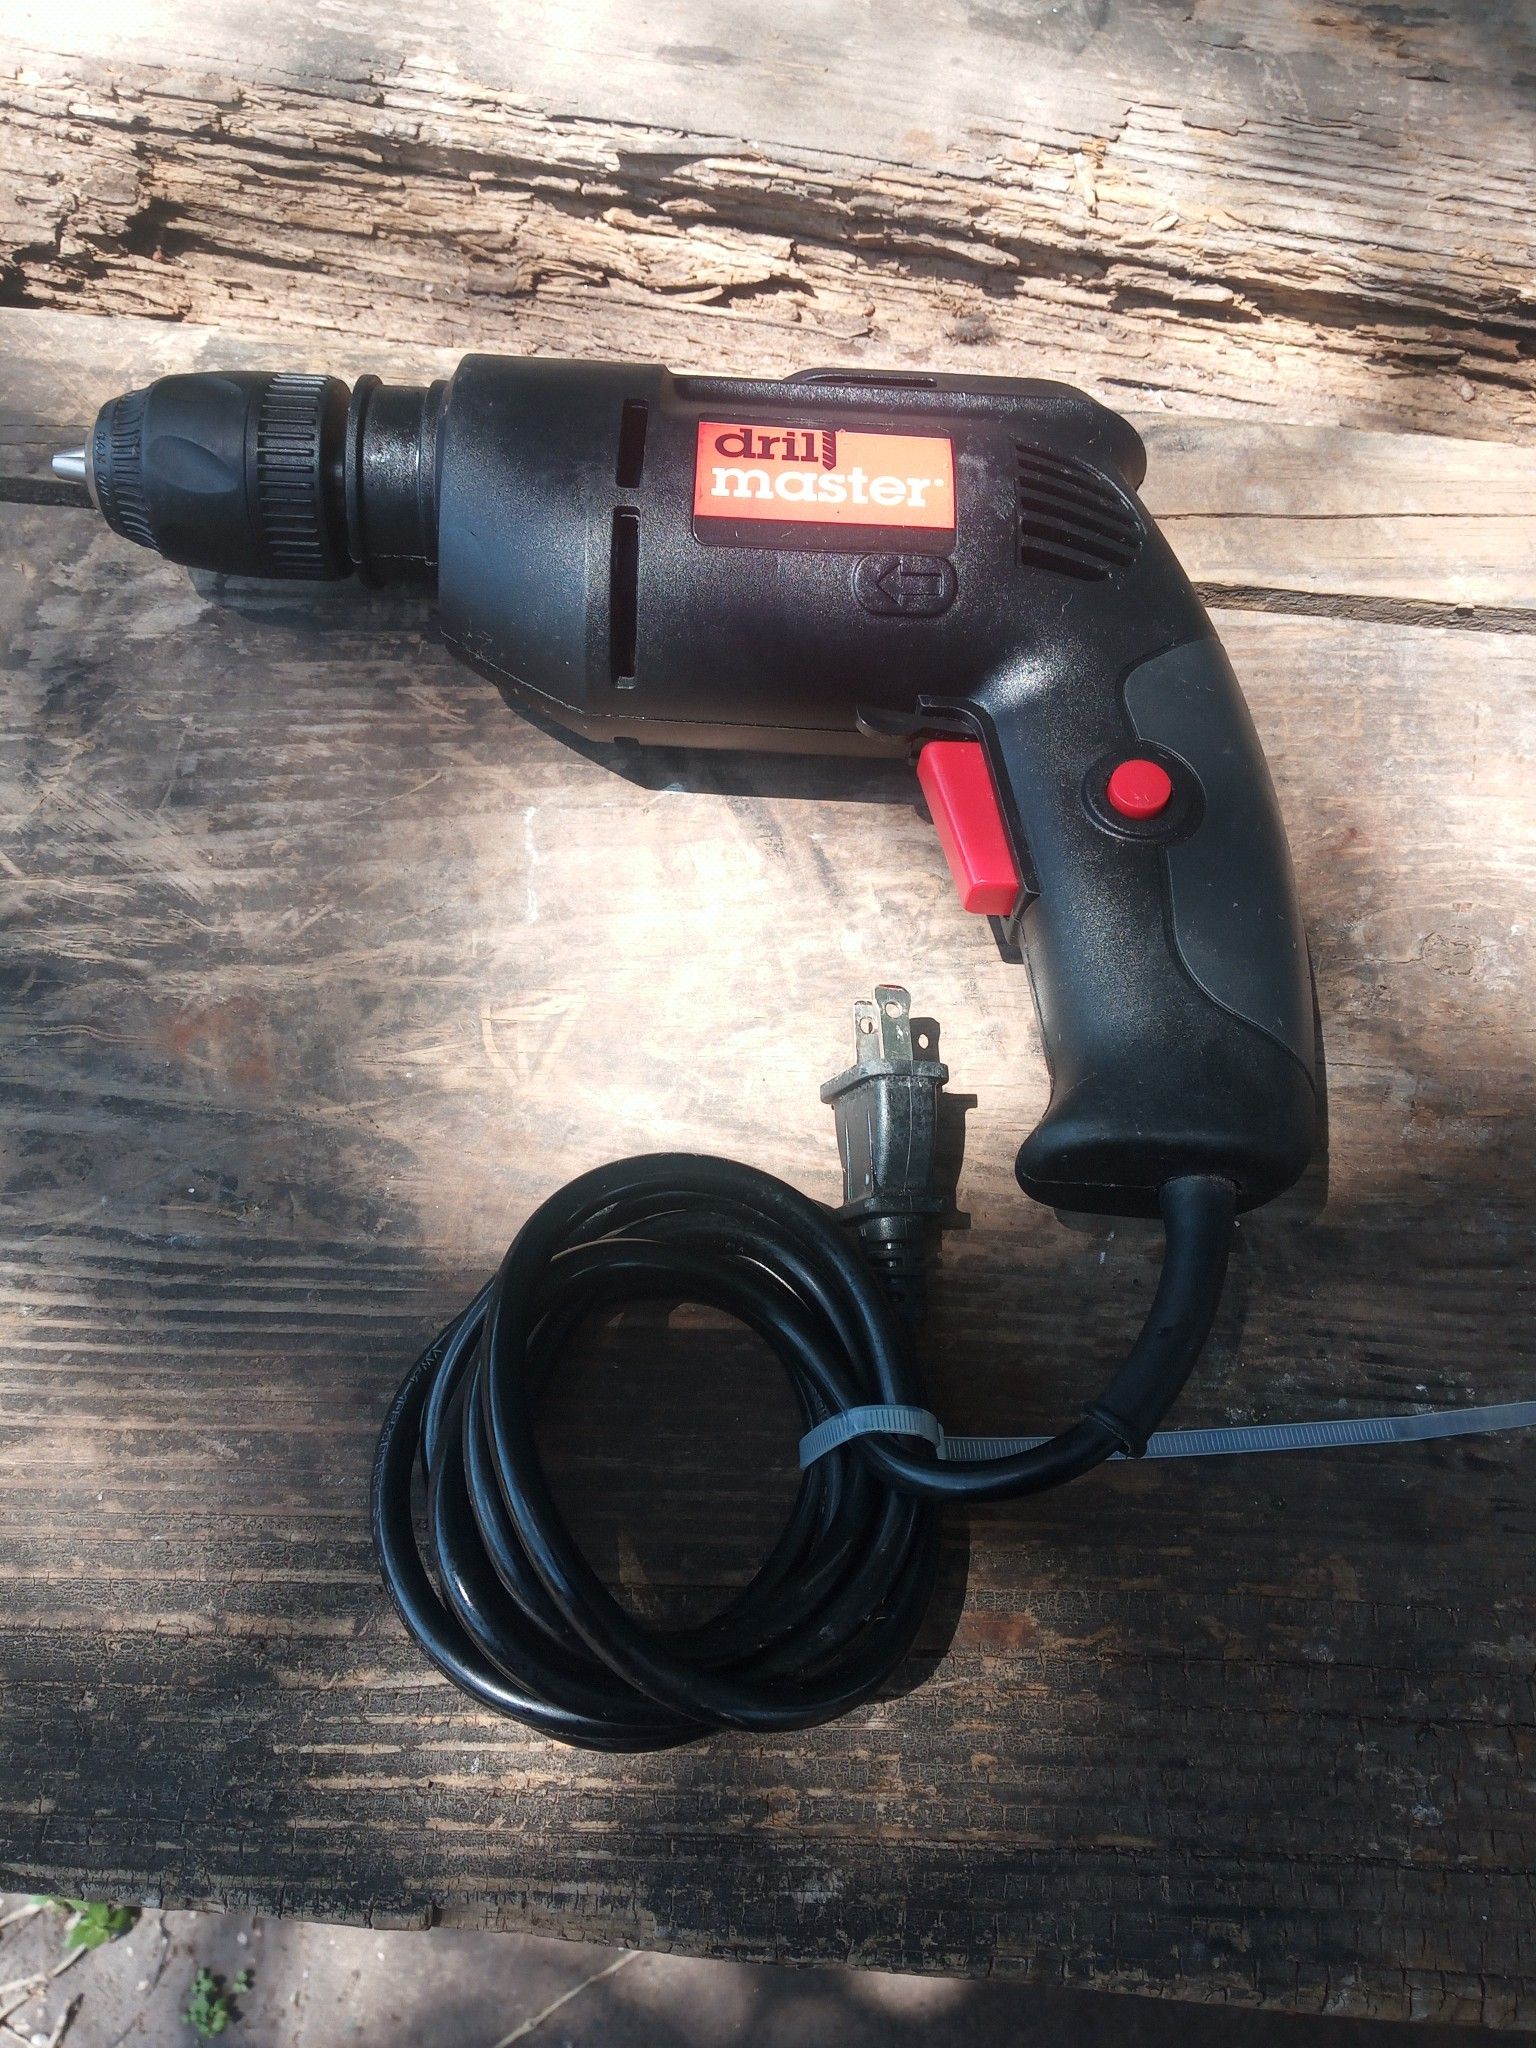 Drill 3/8 electric good condition.